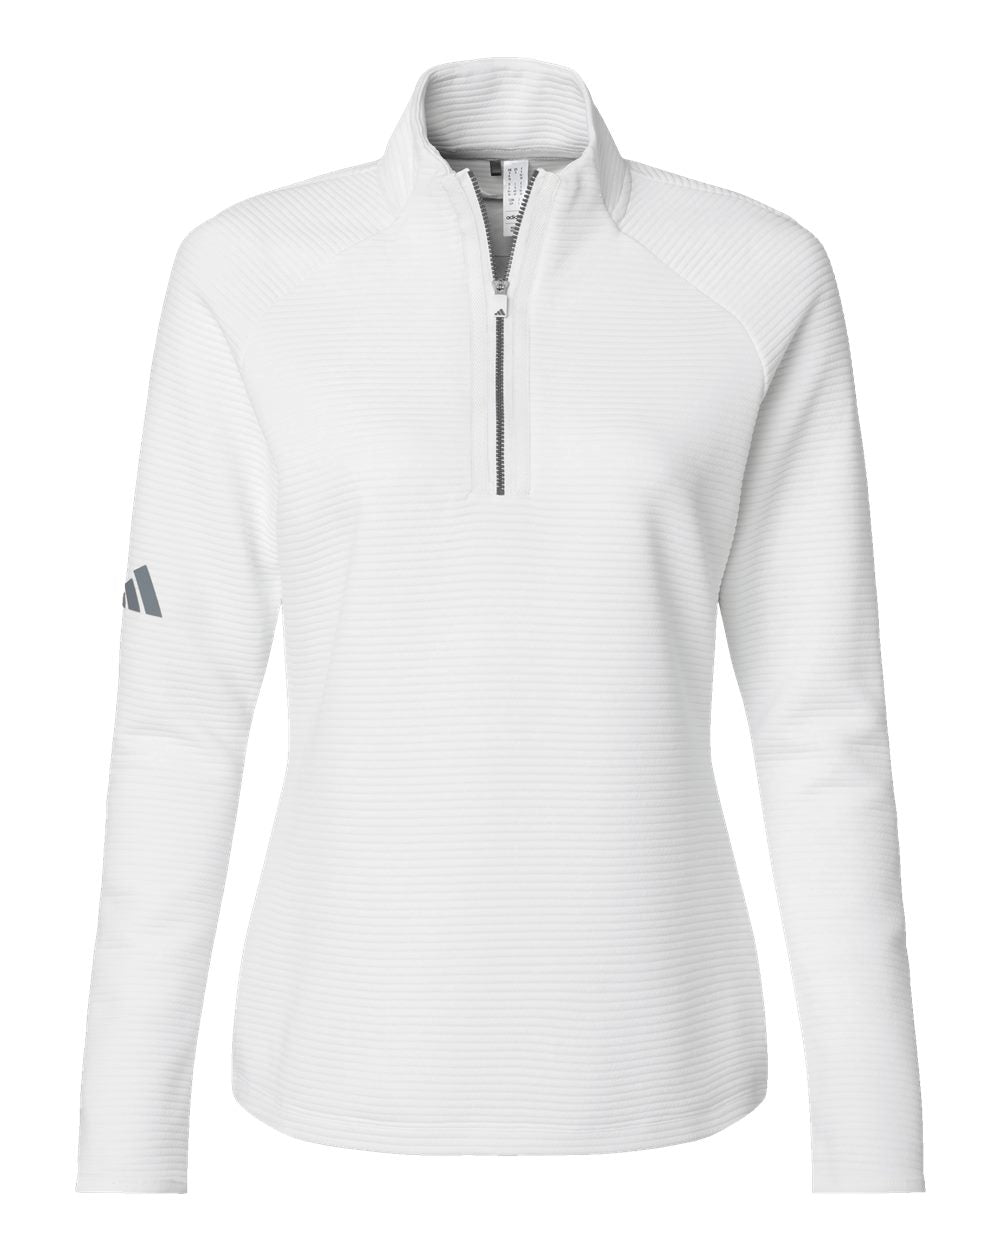 Adidas  A589 Women's Spacer Quarter-Zip Pullover #color_Core White